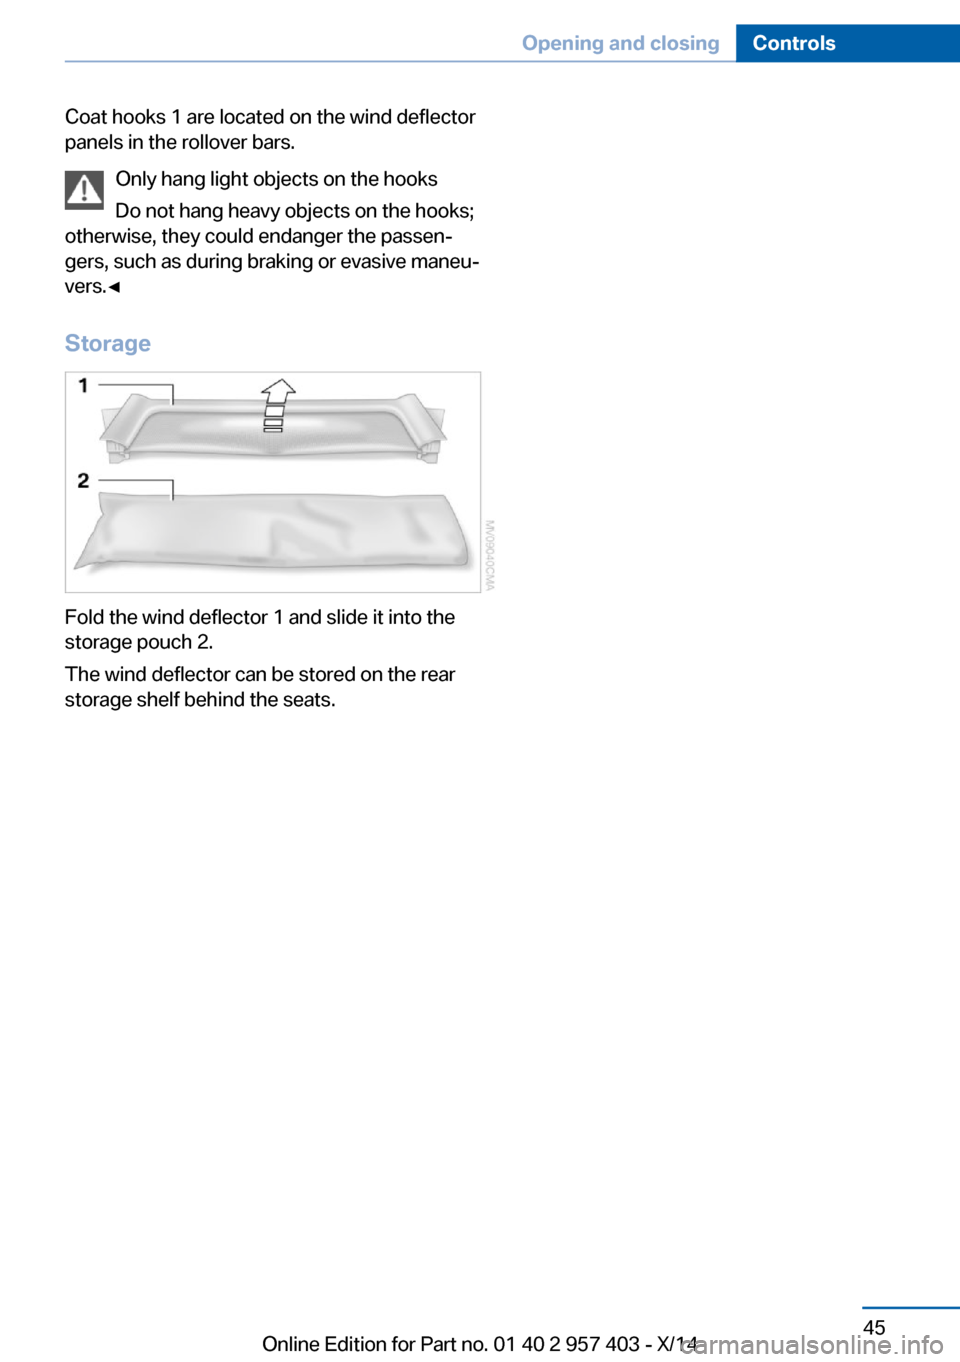 BMW Z4 2014 E89 Service Manual Coat hooks 1 are located on the wind deflector
panels in the rollover bars.
Only hang light objects on the hooks
Do not hang heavy objects on the hooks;
otherwise, they could endanger the passen‐
ge